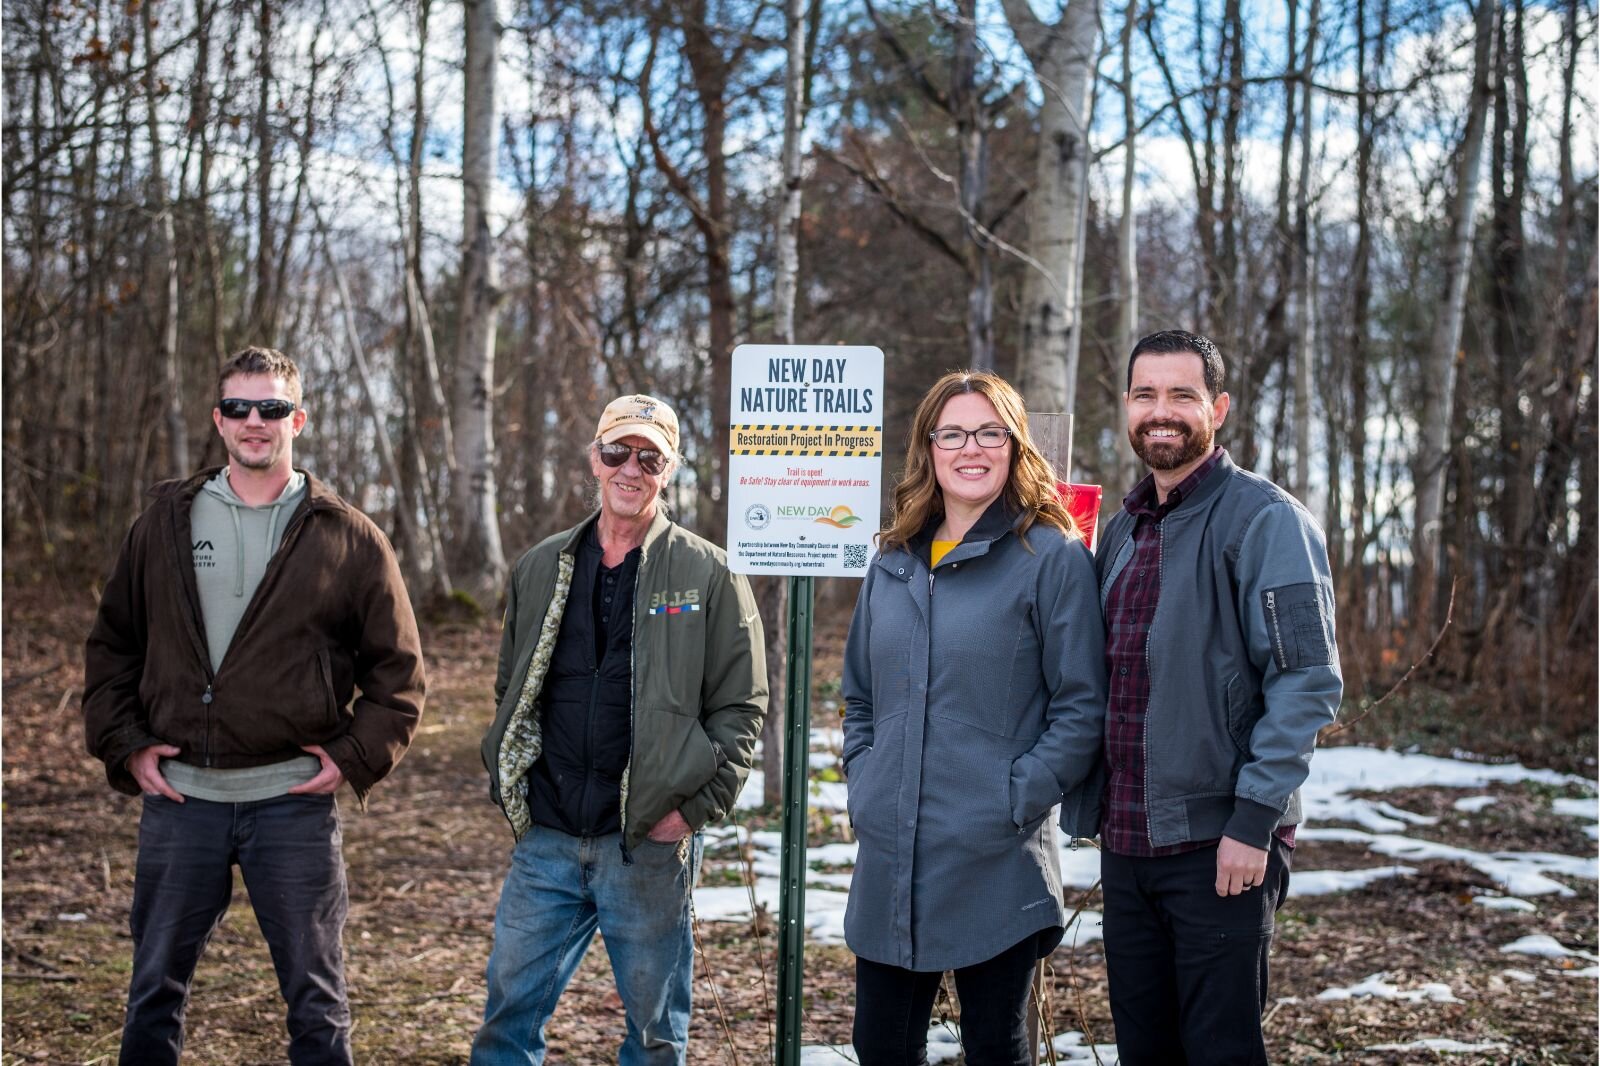 Ken Kesson, DNR Wildlife Biologist who is overseeing the project, neighbor Nate VandenBos, and New Day Co-Pastors Bill and Marilee Menser are enjoying each stage of the New Day Nature Trails restoration process.